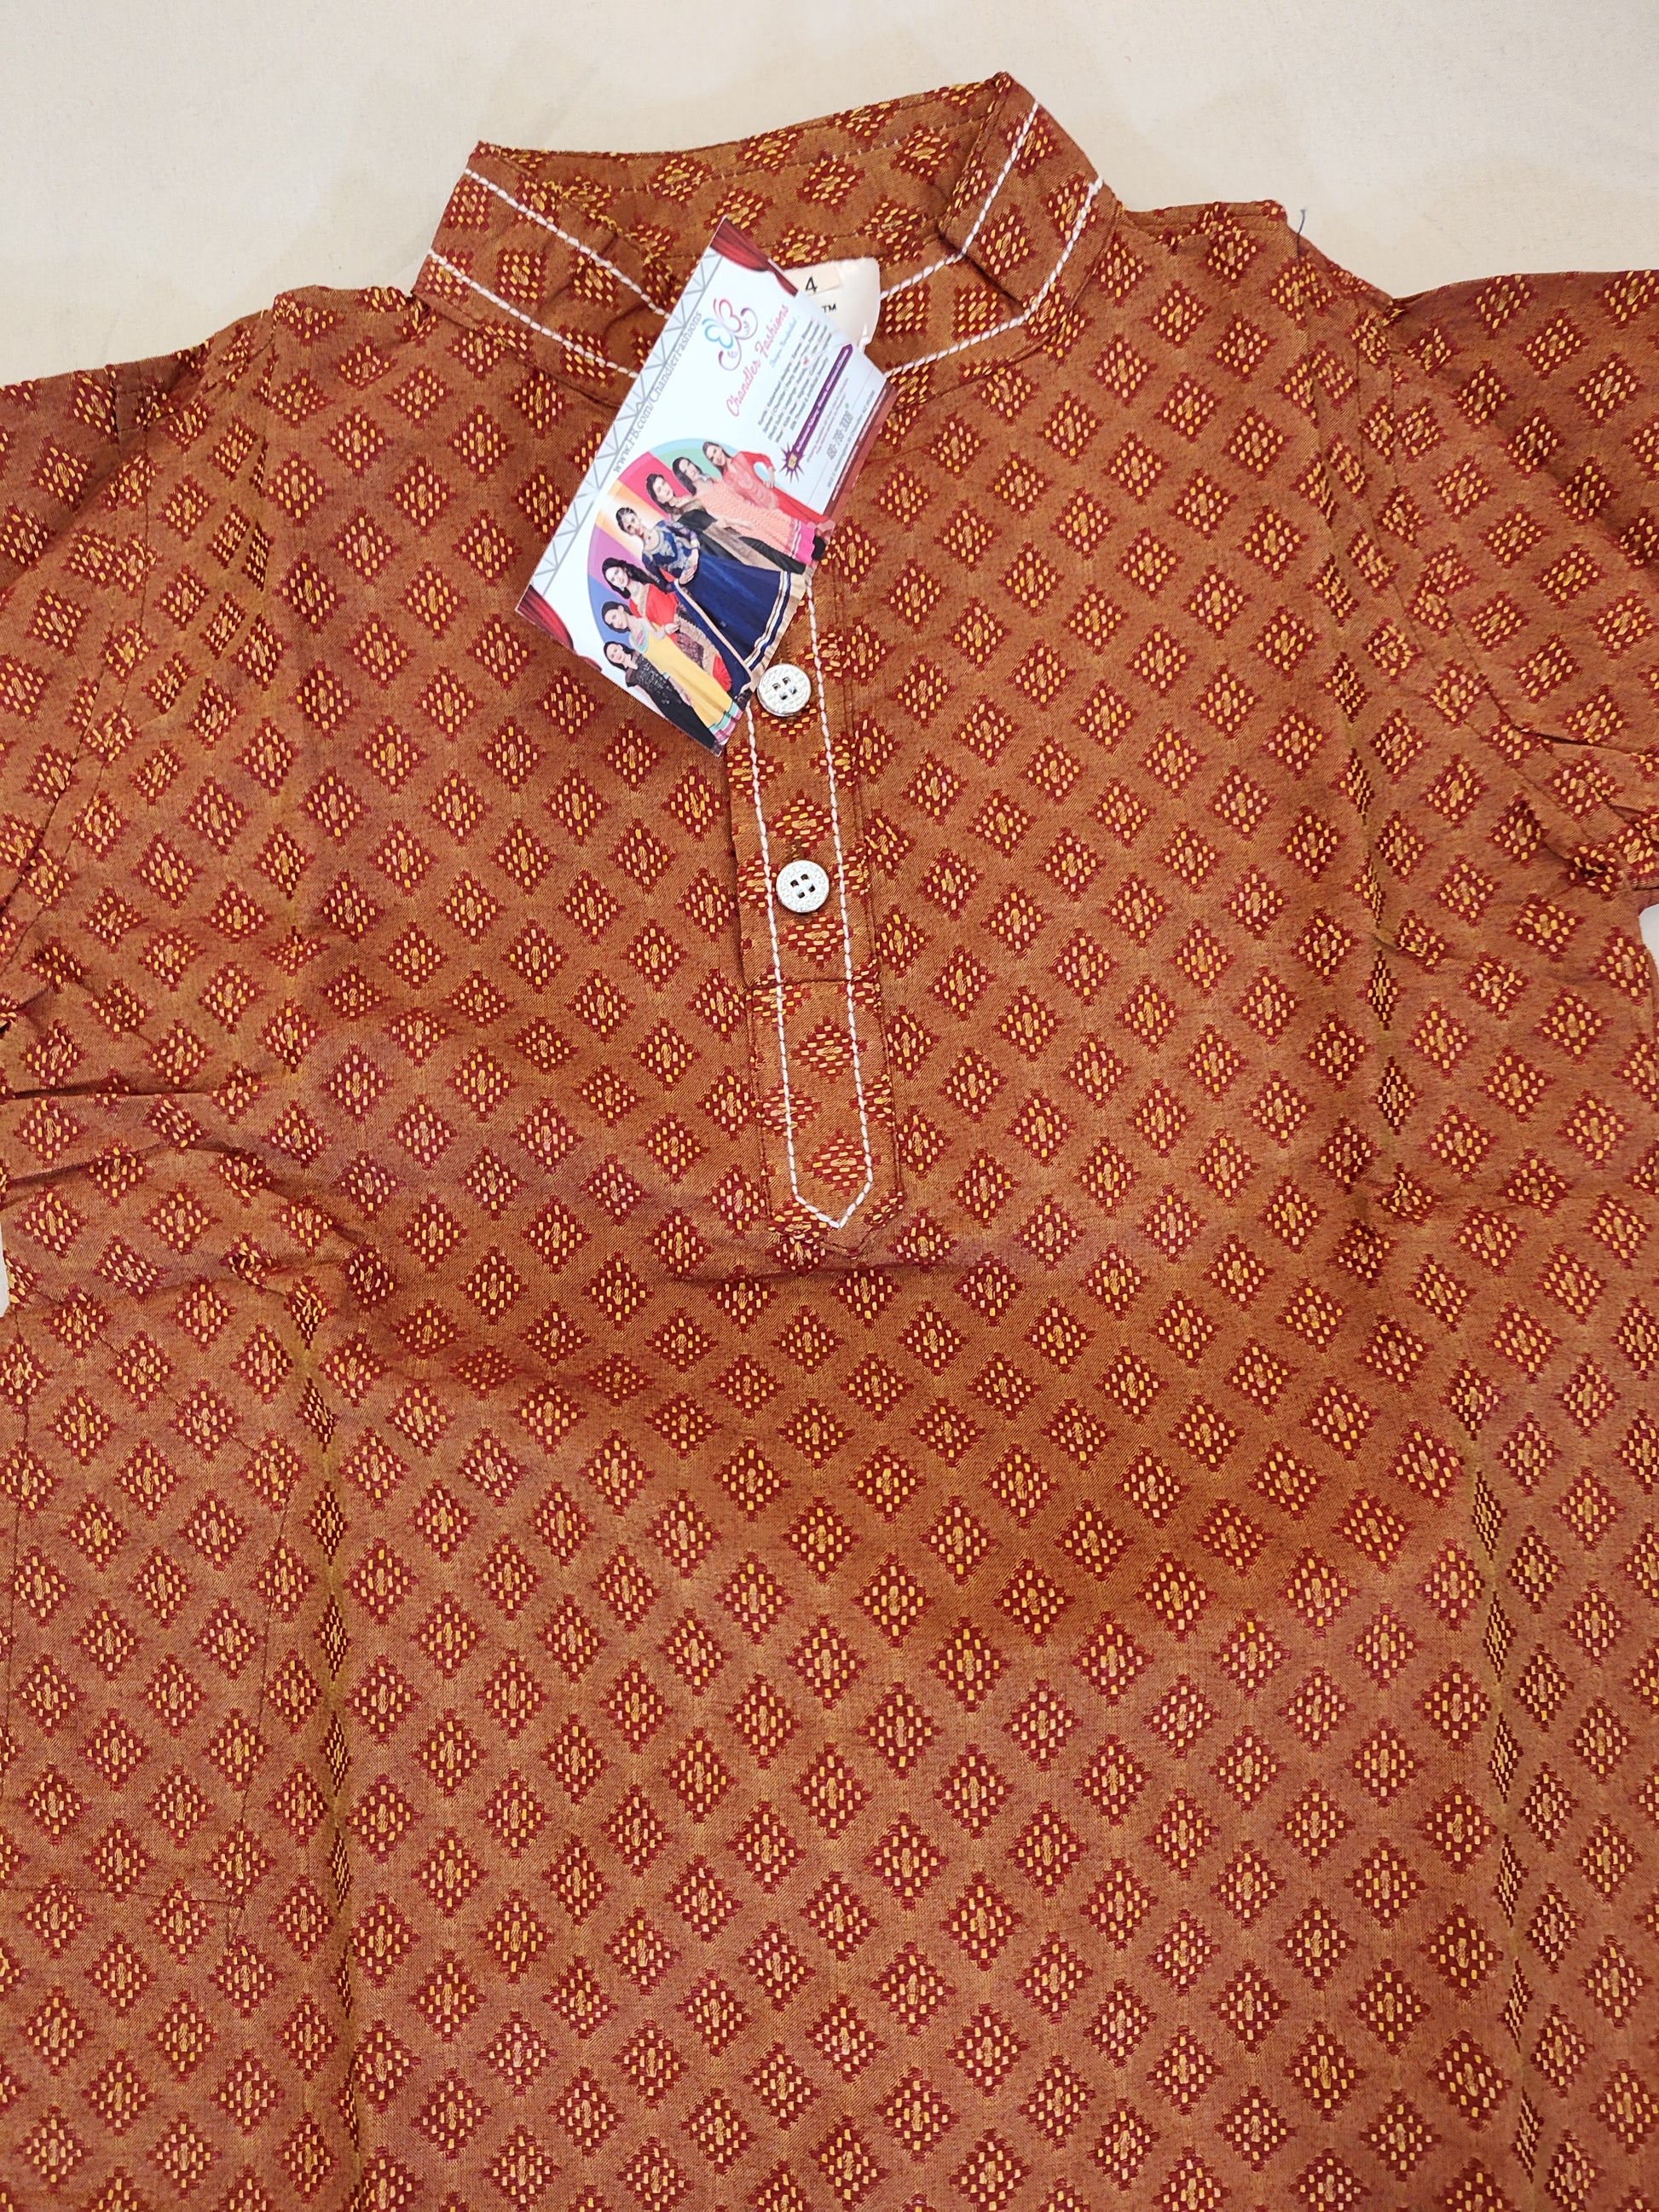 Charming Brown Color Cotton Kurta With Pajama Pants For Kids In Mesa 